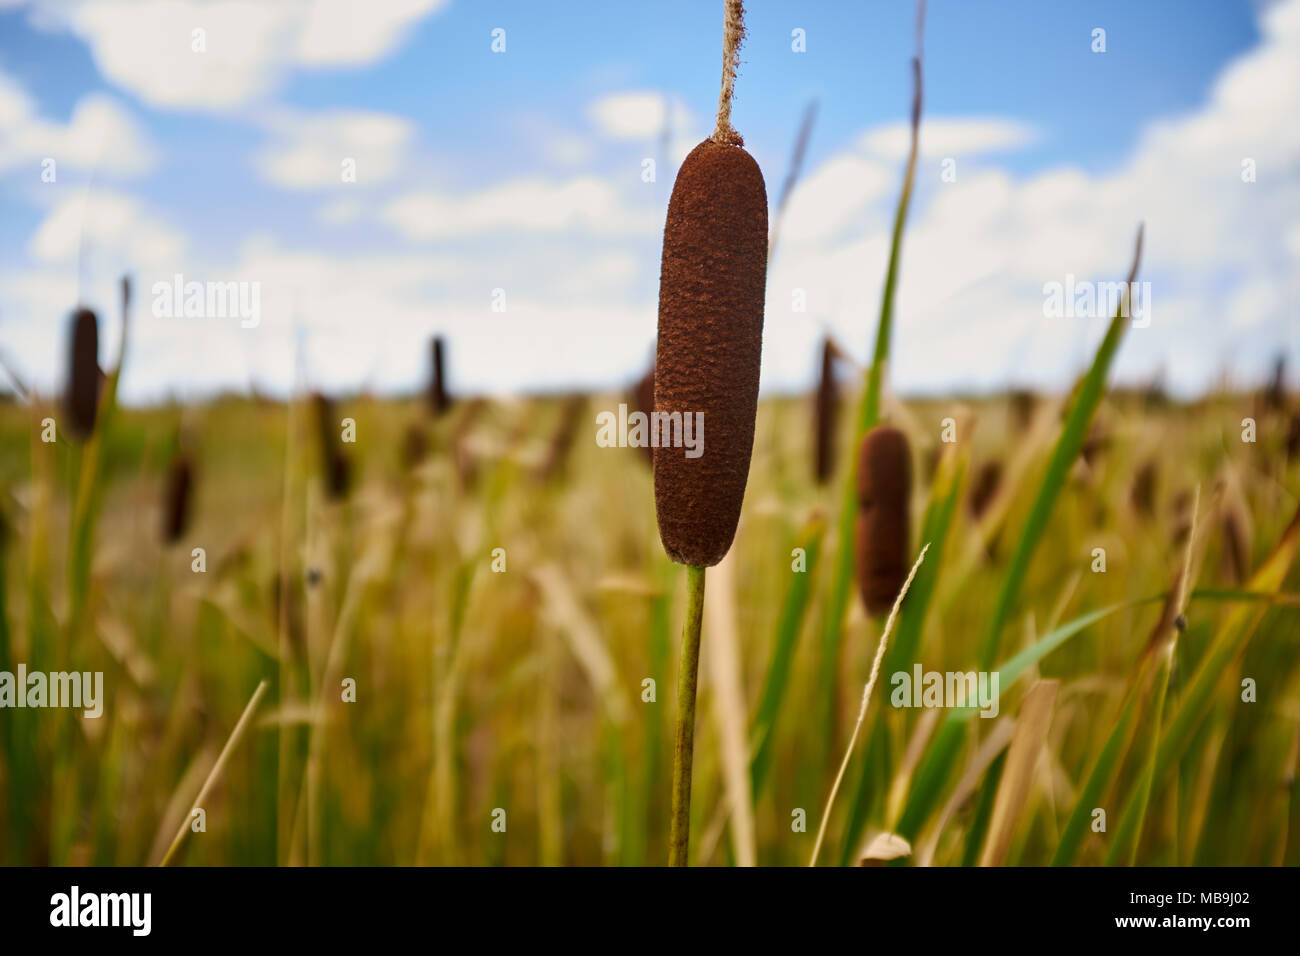 Close up on a single large Cattail bulrush raceme growing in wetlands or a marsh harvested as a biofuel, livestock feed and for its edible rhizome Stock Photo